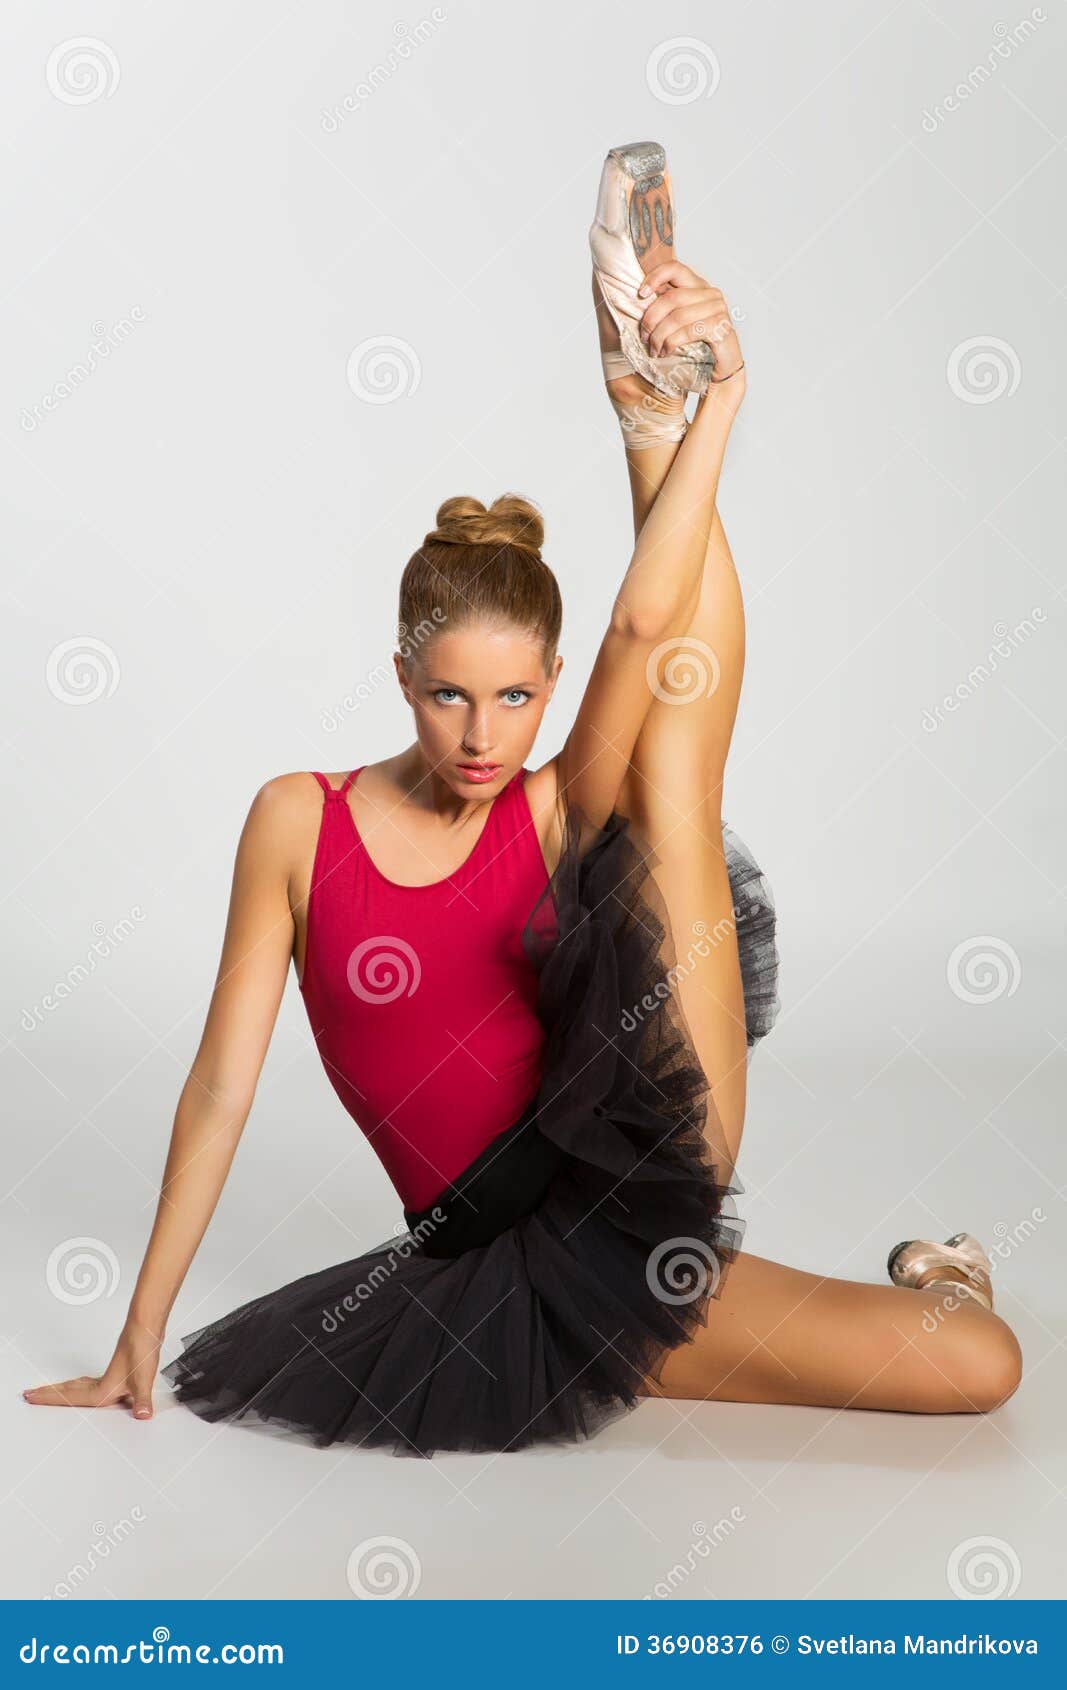 Young Girl Dance Hold Leg Up Hand Out Stock Image - Image 